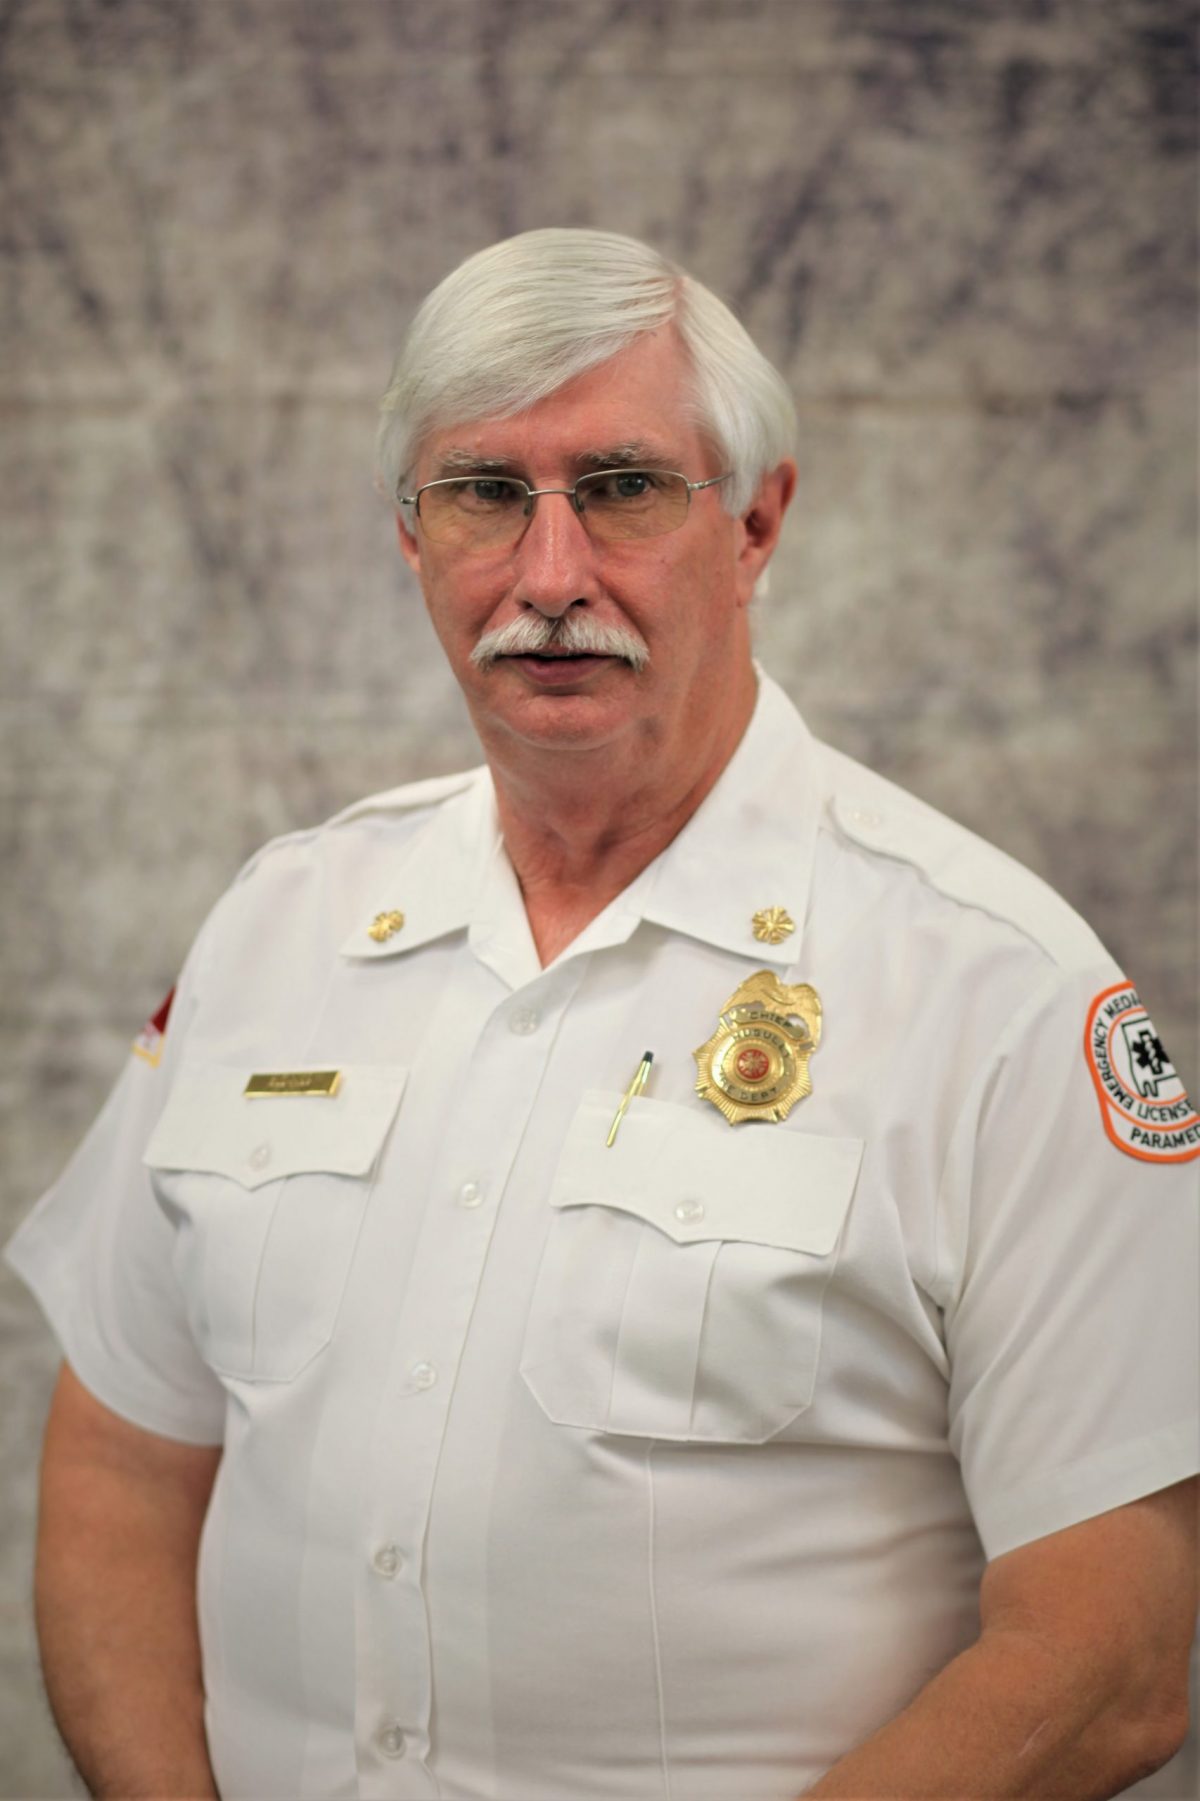 Stan Taylor, Fire Chief